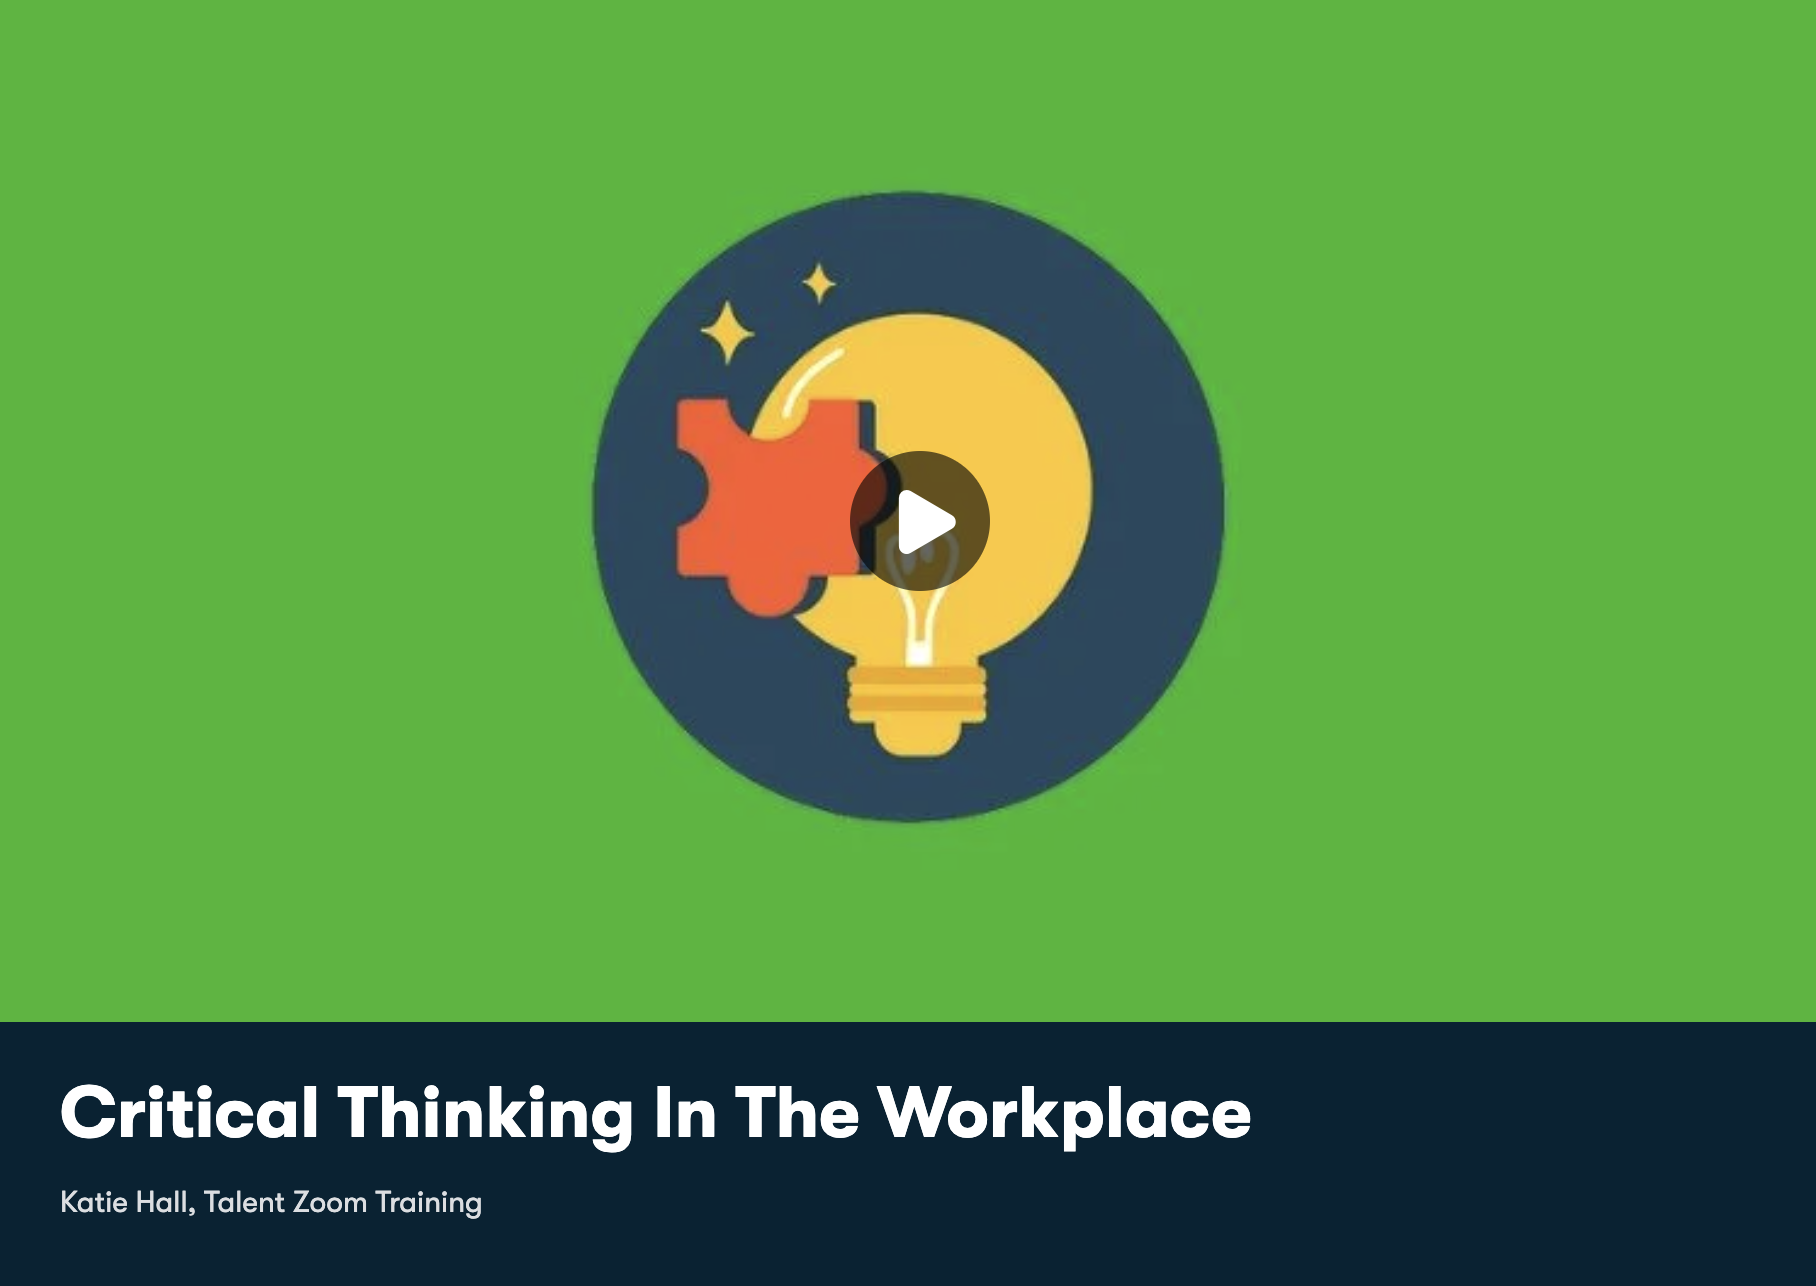 Workplace Applications of Critical Thinking